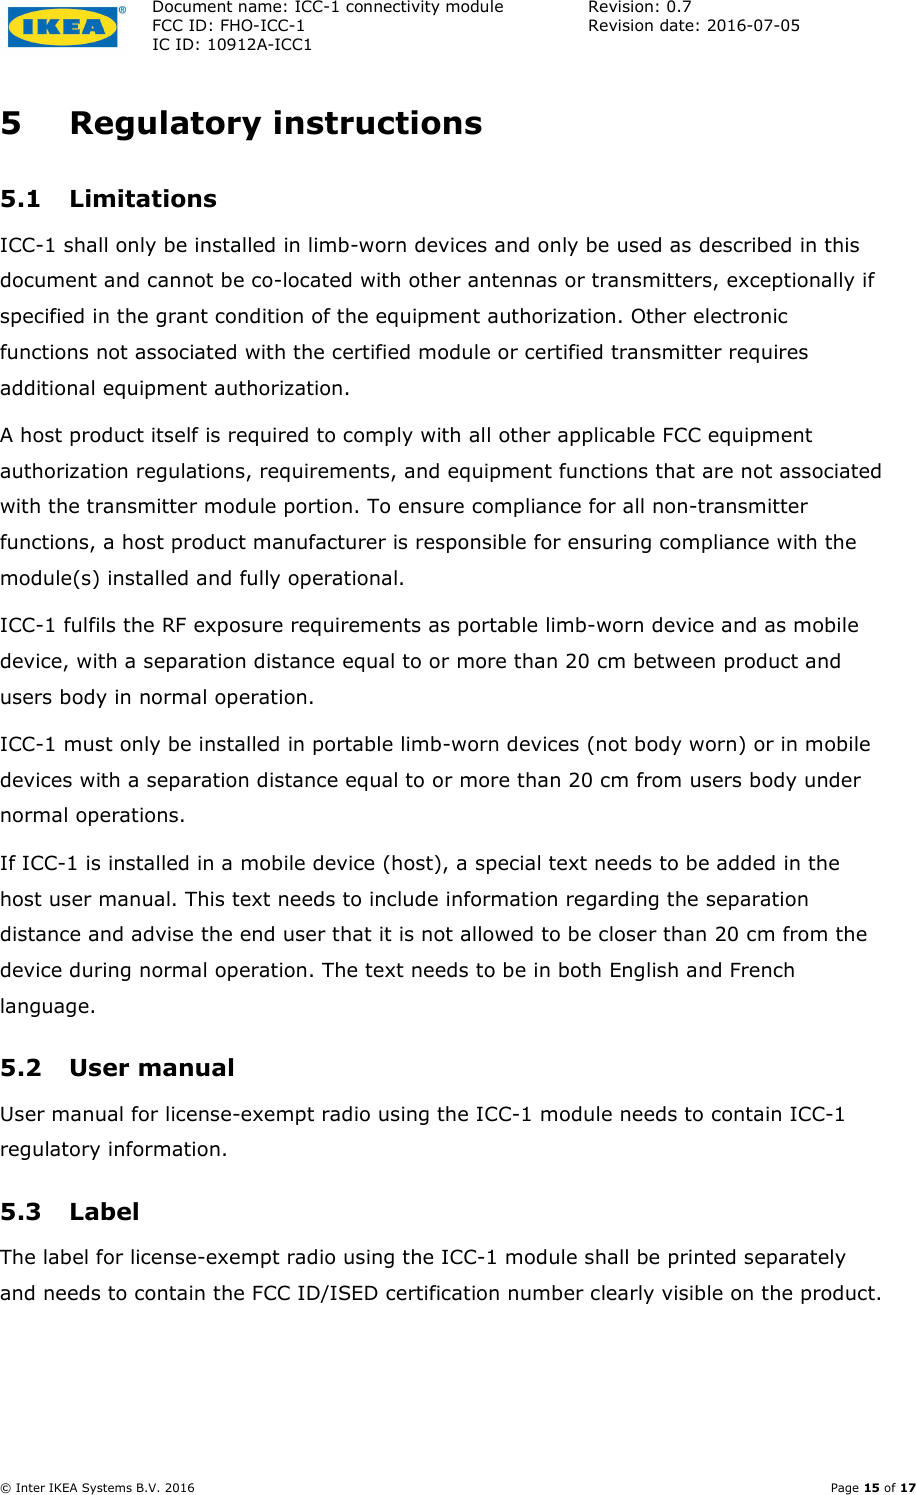 Document name: ICC-1 connectivity module  Revision: 0.7 FCC ID: FHO-ICC-1  Revision date: 2016-07-05  IC ID: 10912A-ICC1     © Inter IKEA Systems B.V. 2016    Page 15 of 17 5 Regulatory instructions 5.1 Limitations ICC-1 shall only be installed in limb-worn devices and only be used as described in this document and cannot be co-located with other antennas or transmitters, exceptionally if specified in the grant condition of the equipment authorization. Other electronic functions not associated with the certified module or certified transmitter requires additional equipment authorization. A host product itself is required to comply with all other applicable FCC equipment authorization regulations, requirements, and equipment functions that are not associated with the transmitter module portion. To ensure compliance for all non-transmitter functions, a host product manufacturer is responsible for ensuring compliance with the module(s) installed and fully operational. ICC-1 fulfils the RF exposure requirements as portable limb-worn device and as mobile device, with a separation distance equal to or more than 20 cm between product and users body in normal operation. ICC-1 must only be installed in portable limb-worn devices (not body worn) or in mobile devices with a separation distance equal to or more than 20 cm from users body under normal operations. If ICC-1 is installed in a mobile device (host), a special text needs to be added in the host user manual. This text needs to include information regarding the separation distance and advise the end user that it is not allowed to be closer than 20 cm from the device during normal operation. The text needs to be in both English and French language. 5.2 User manual User manual for license-exempt radio using the ICC-1 module needs to contain ICC-1 regulatory information. 5.3 Label The label for license-exempt radio using the ICC-1 module shall be printed separately and needs to contain the FCC ID/ISED certification number clearly visible on the product. 